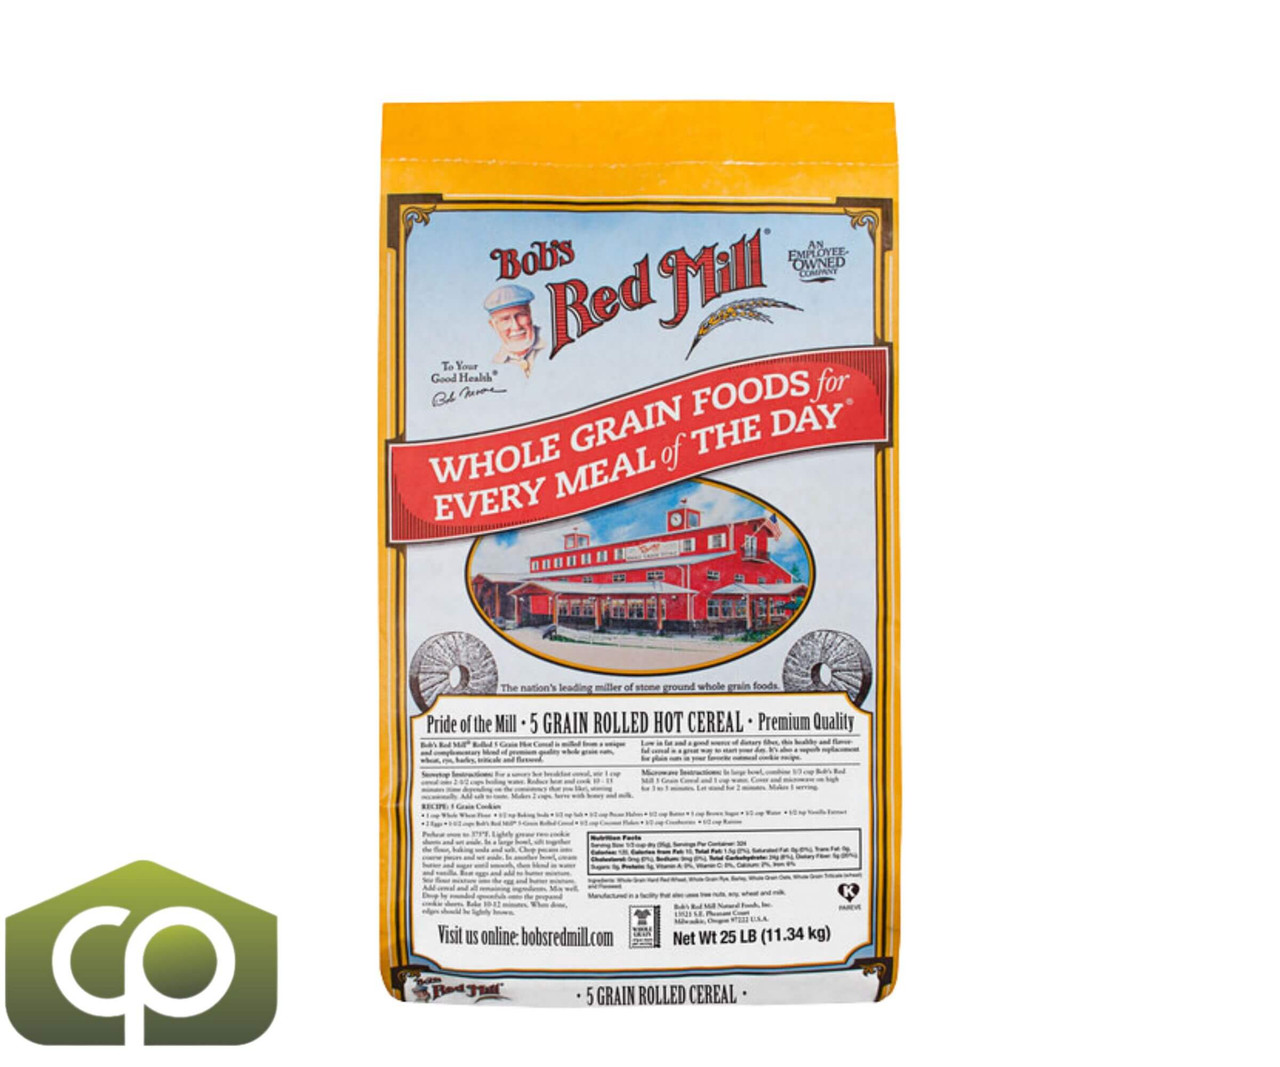 Bob's Red Mill 25 lbs. (11.34 kg) 5-Grain Rolled Cereal - Hearty Blend-Chicken Pieces